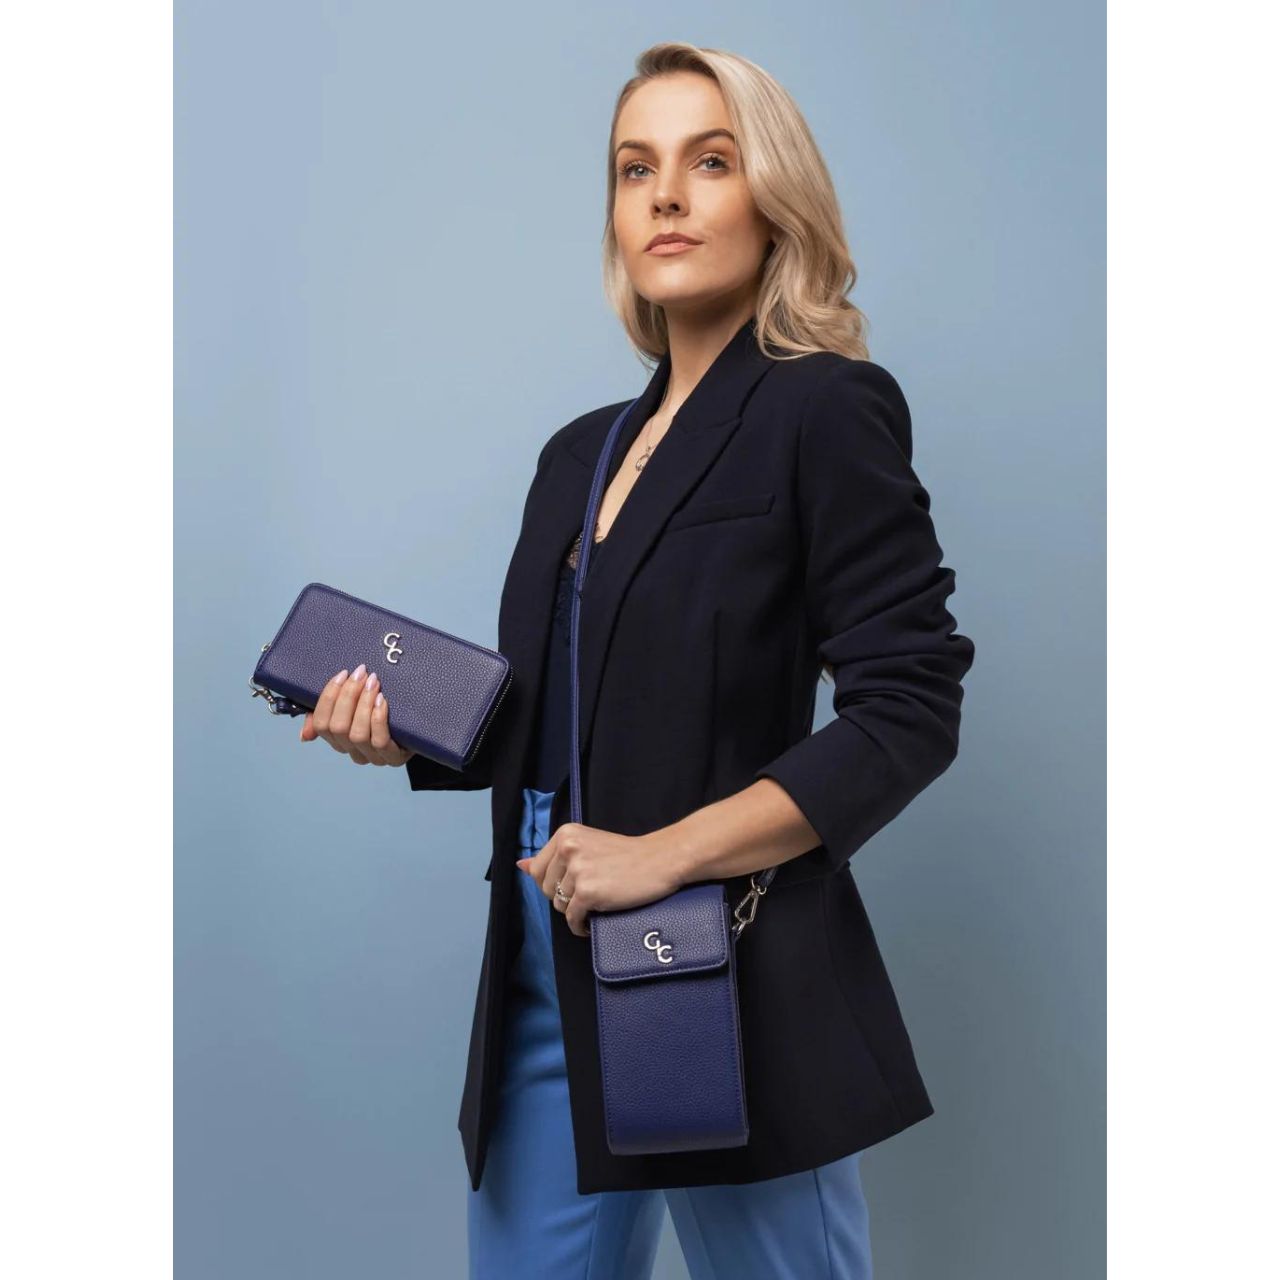 Mini Cross Bag - Navy by Galway Crystal  Introducing the new must have accessory that is truly functional. Our Light weight, Slim, Sleek, Crossbody bag is designed to hold the most essential accessory: Your mobile phone. There is nothing more liberating than carrying a lightweight bag that carries your essentials.